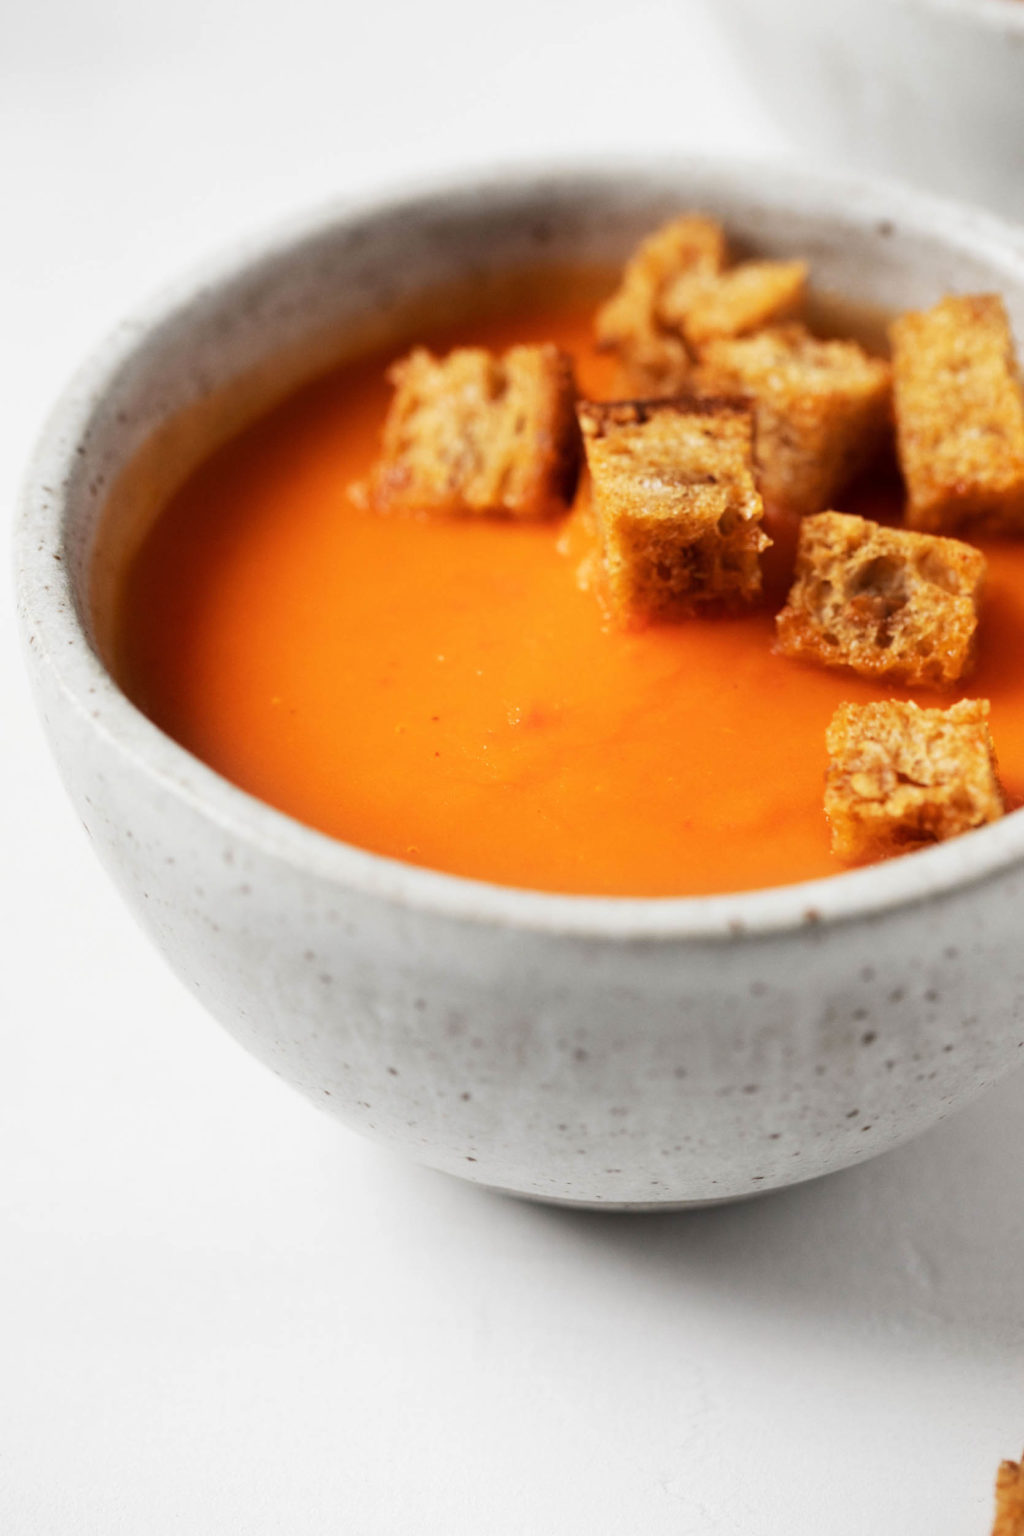 A zoomed in image of a creamy, orange hued plant-based soup, topped with crispy bread cubes.